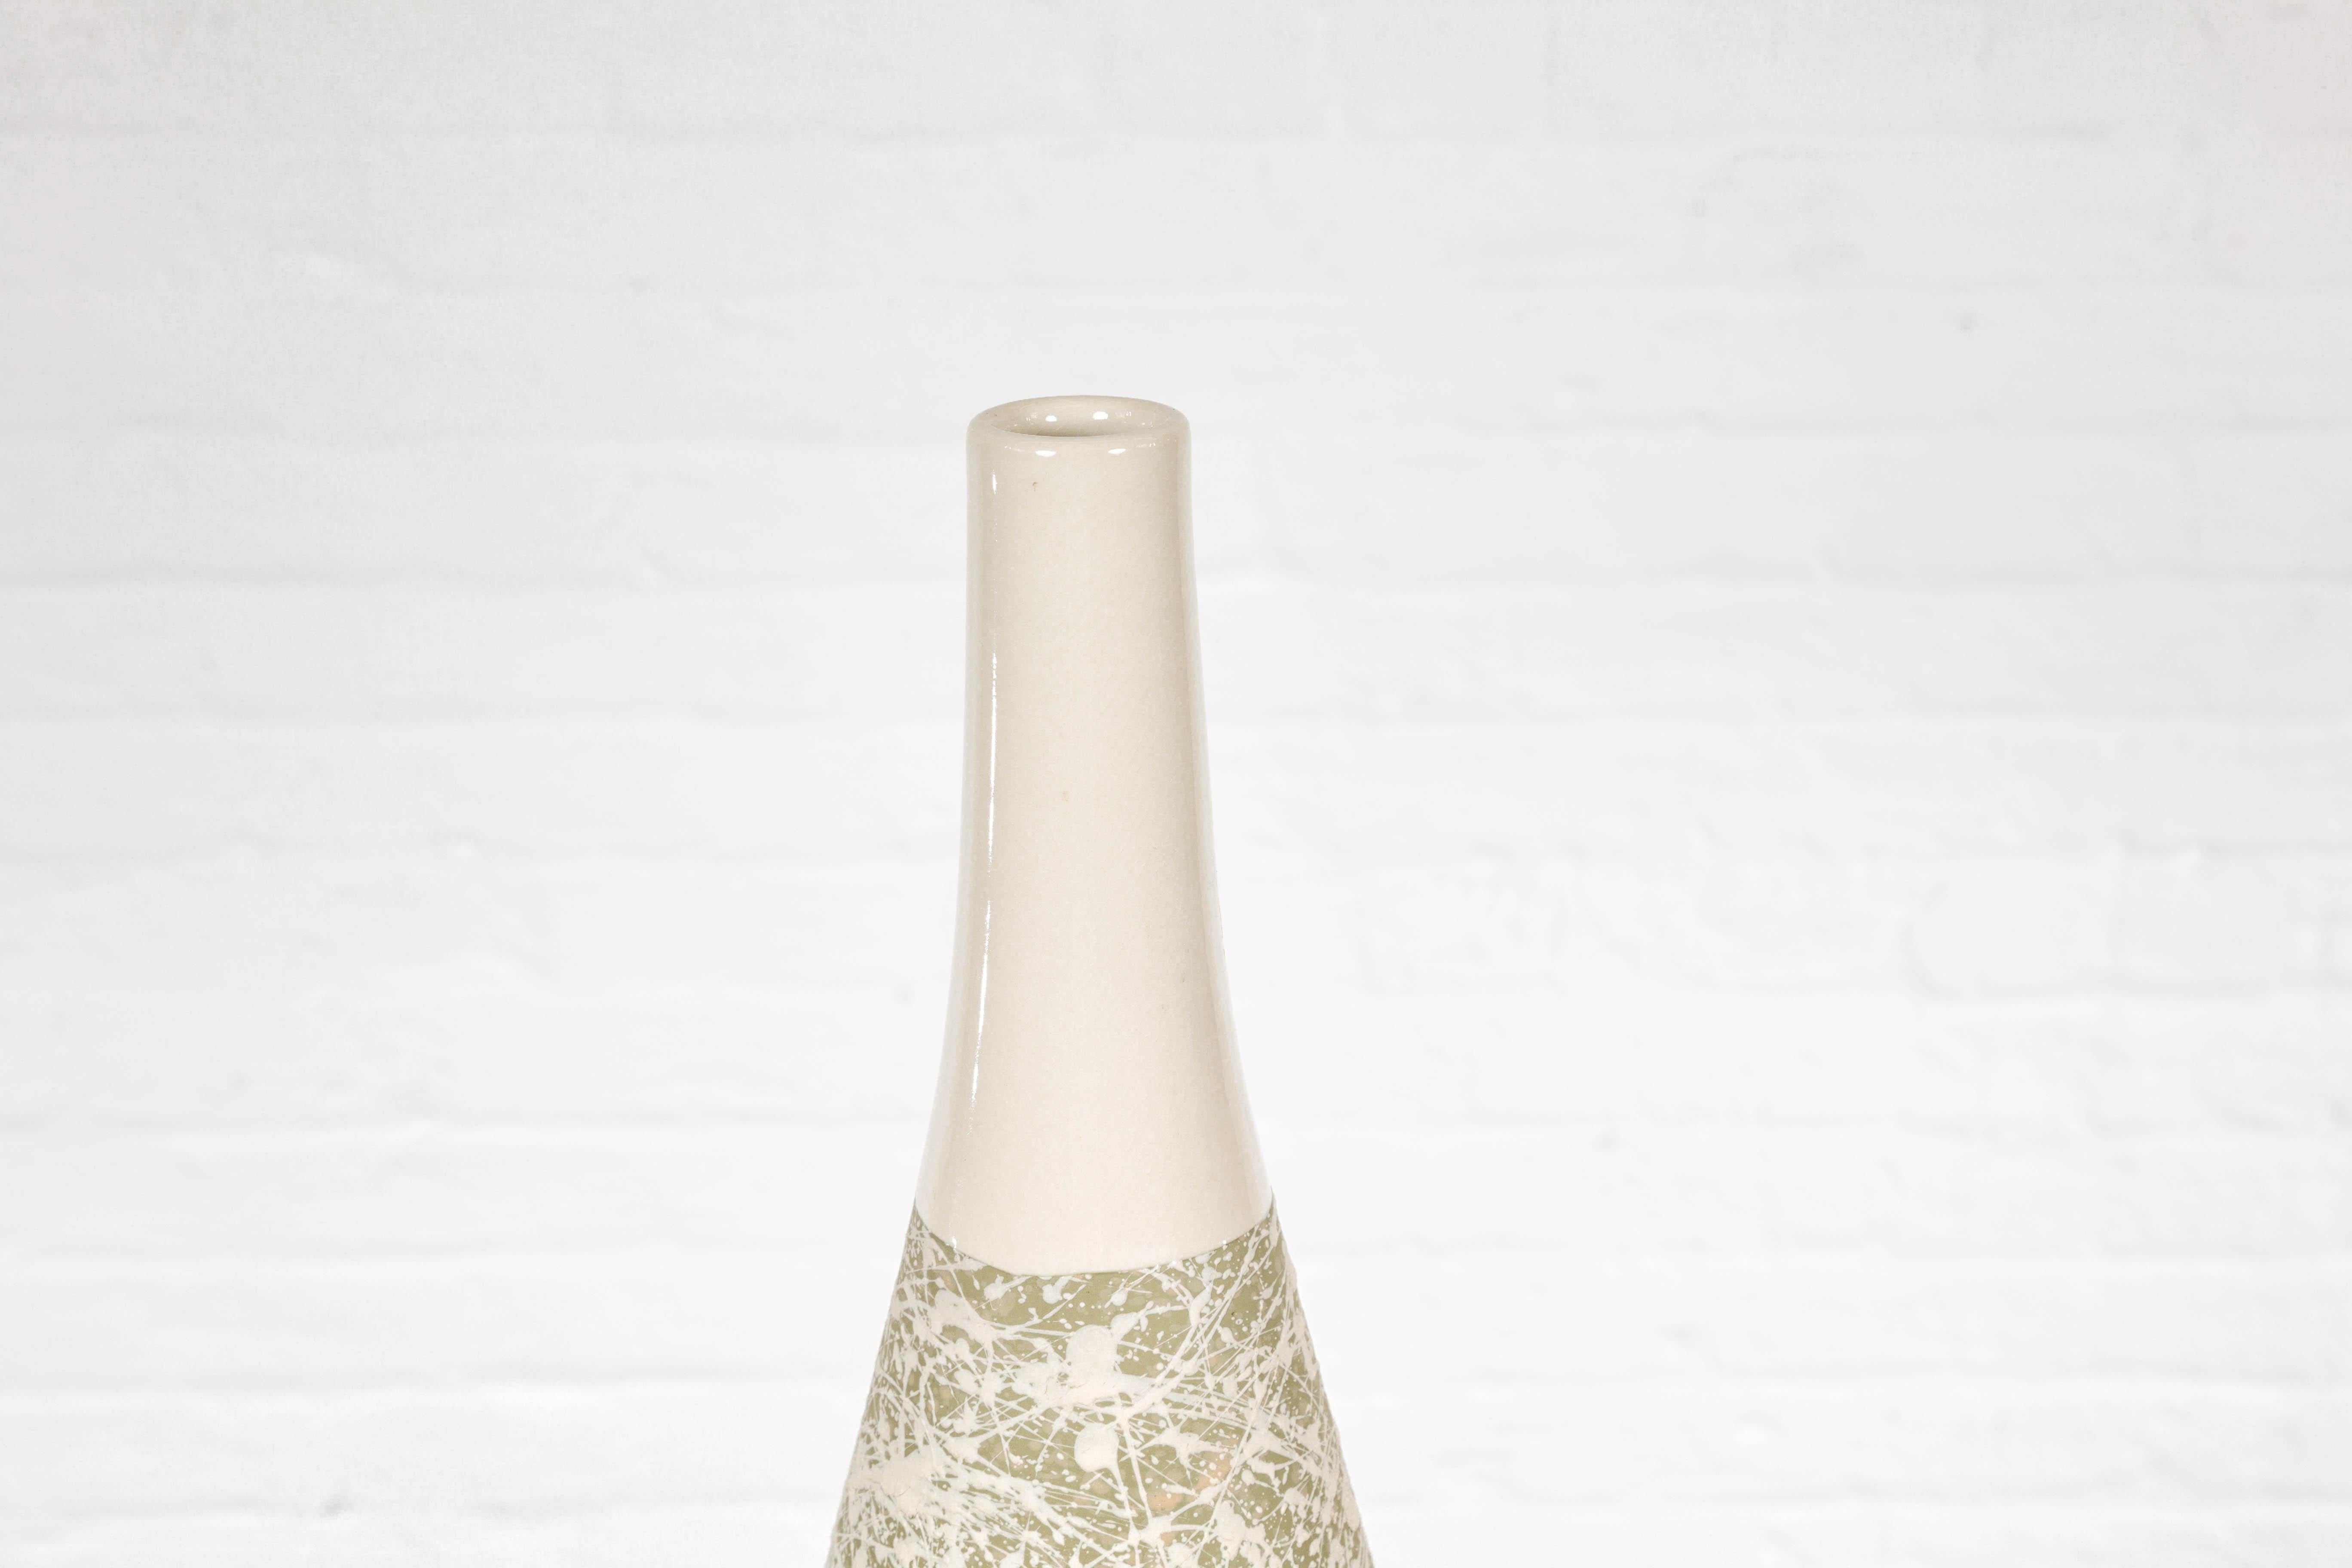 Contemporary Soft Green and Cream Artisan Ceramic Vase with Energetic Dripping Décor For Sale